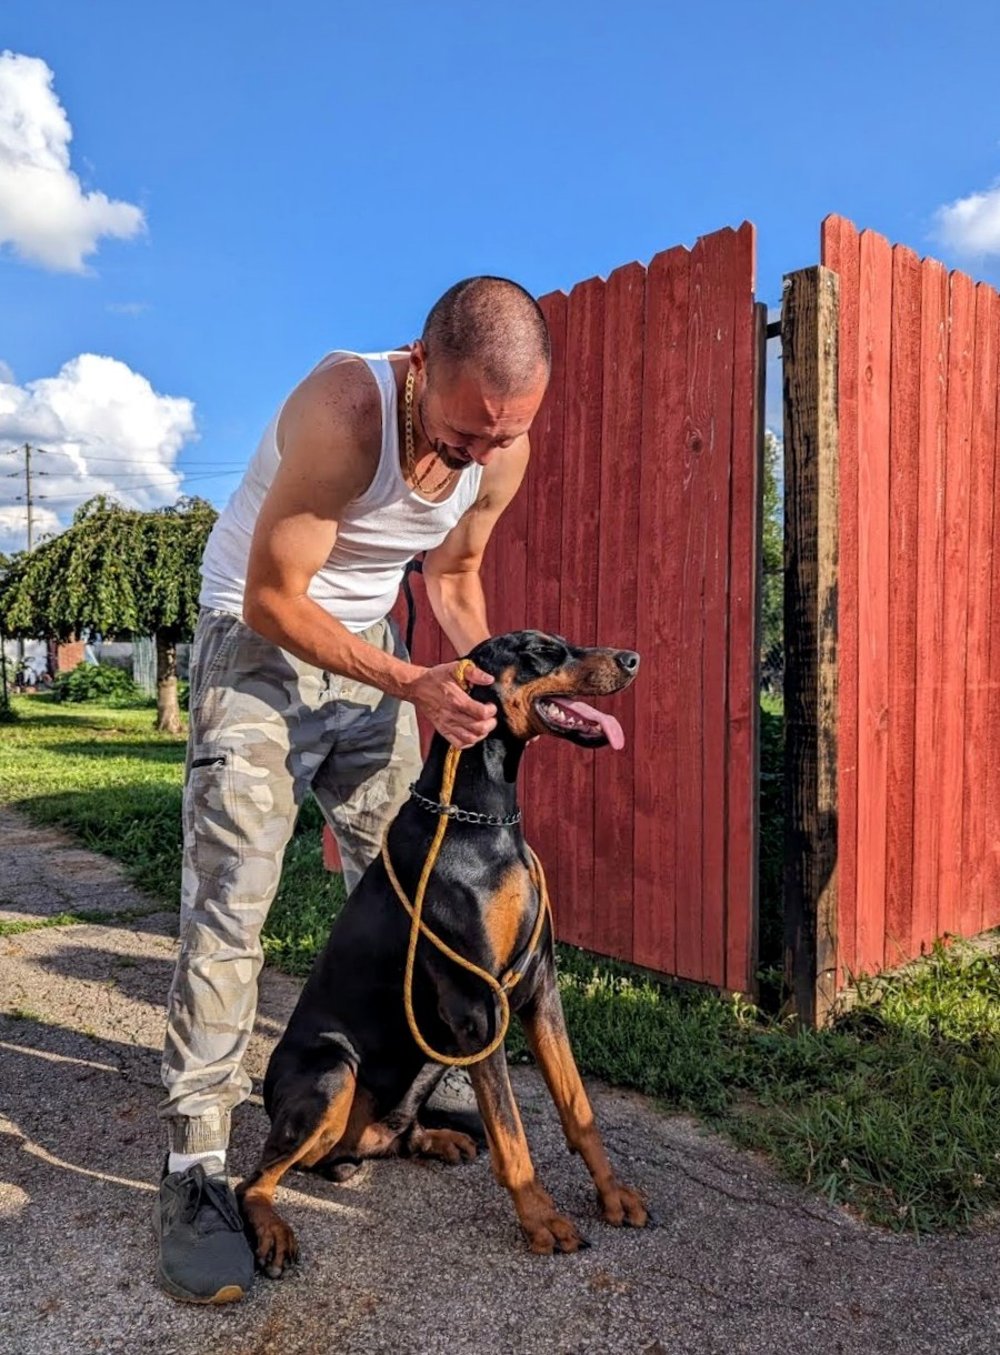 Ohio Dobermans Best Doberman Breeder Black Male Puppy Dog Cropped Ears Family Pet Professionally Trained Bite Sport Dog Dangerous Sitting with Nice Muscular White Man in Front of Privacy Fence